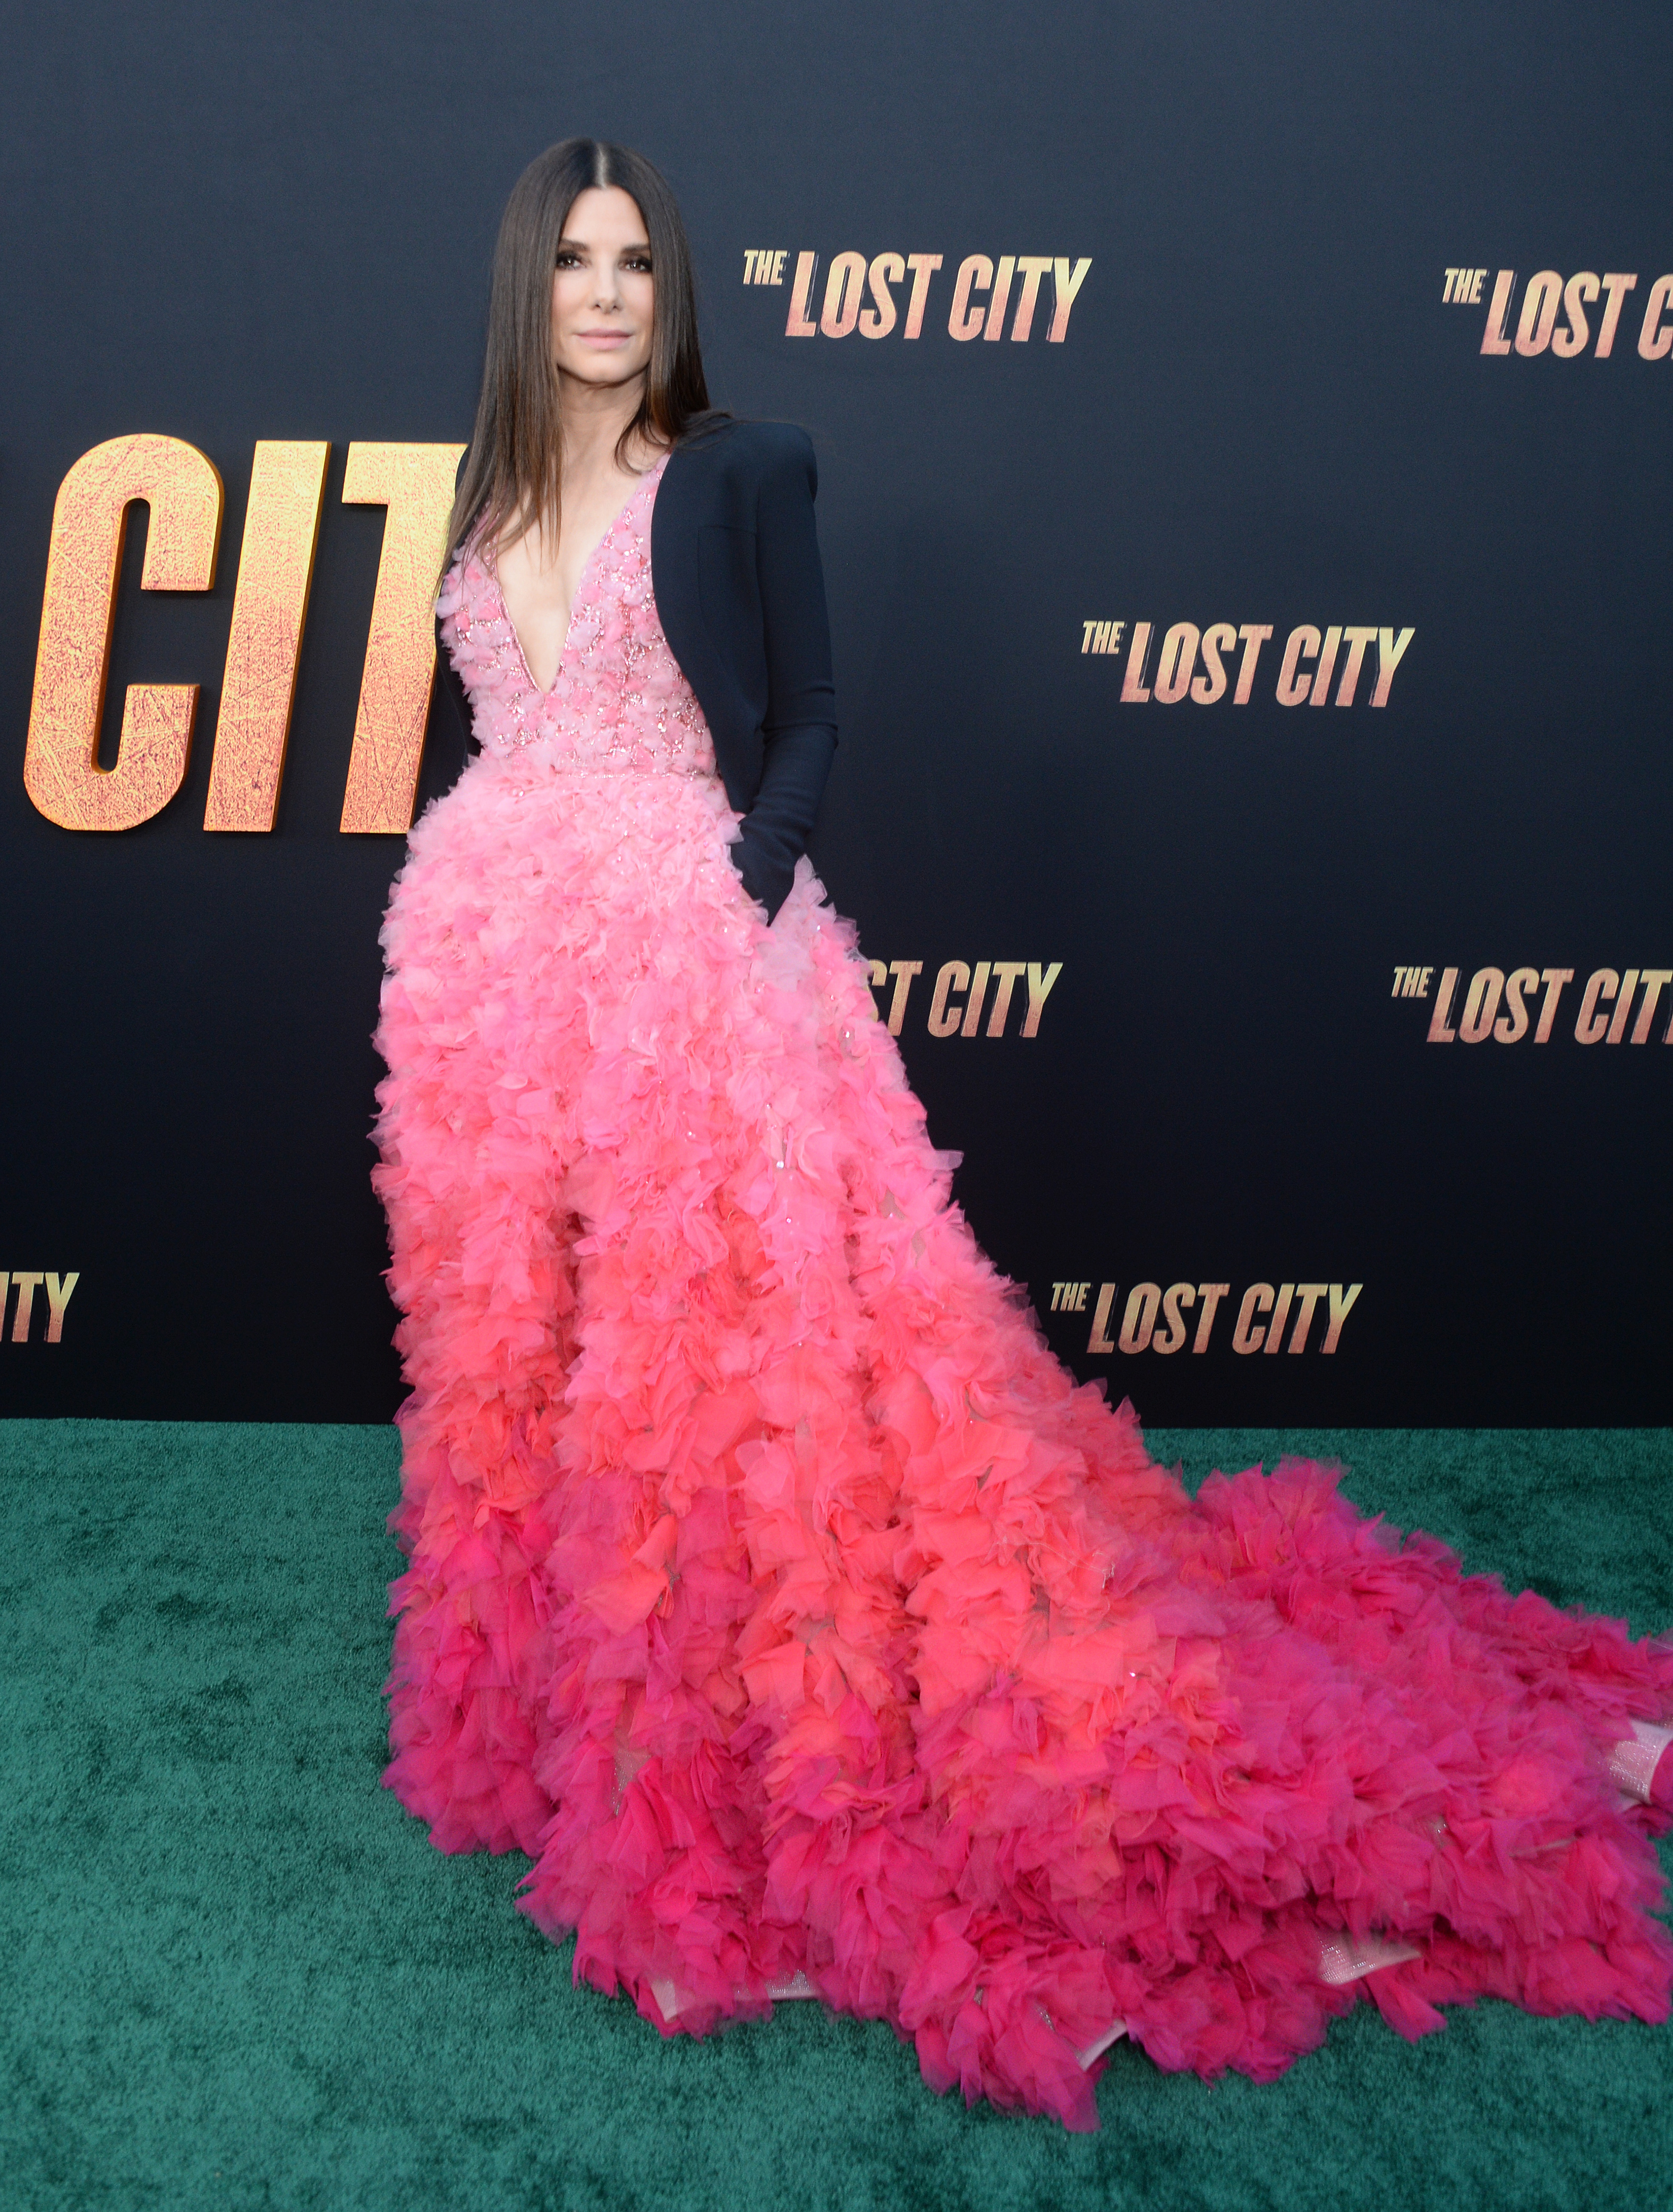 Sandra Bullock strikes a pose at The Lost City Hollywood premiere on March 21, 2022, in Los Angeles, California